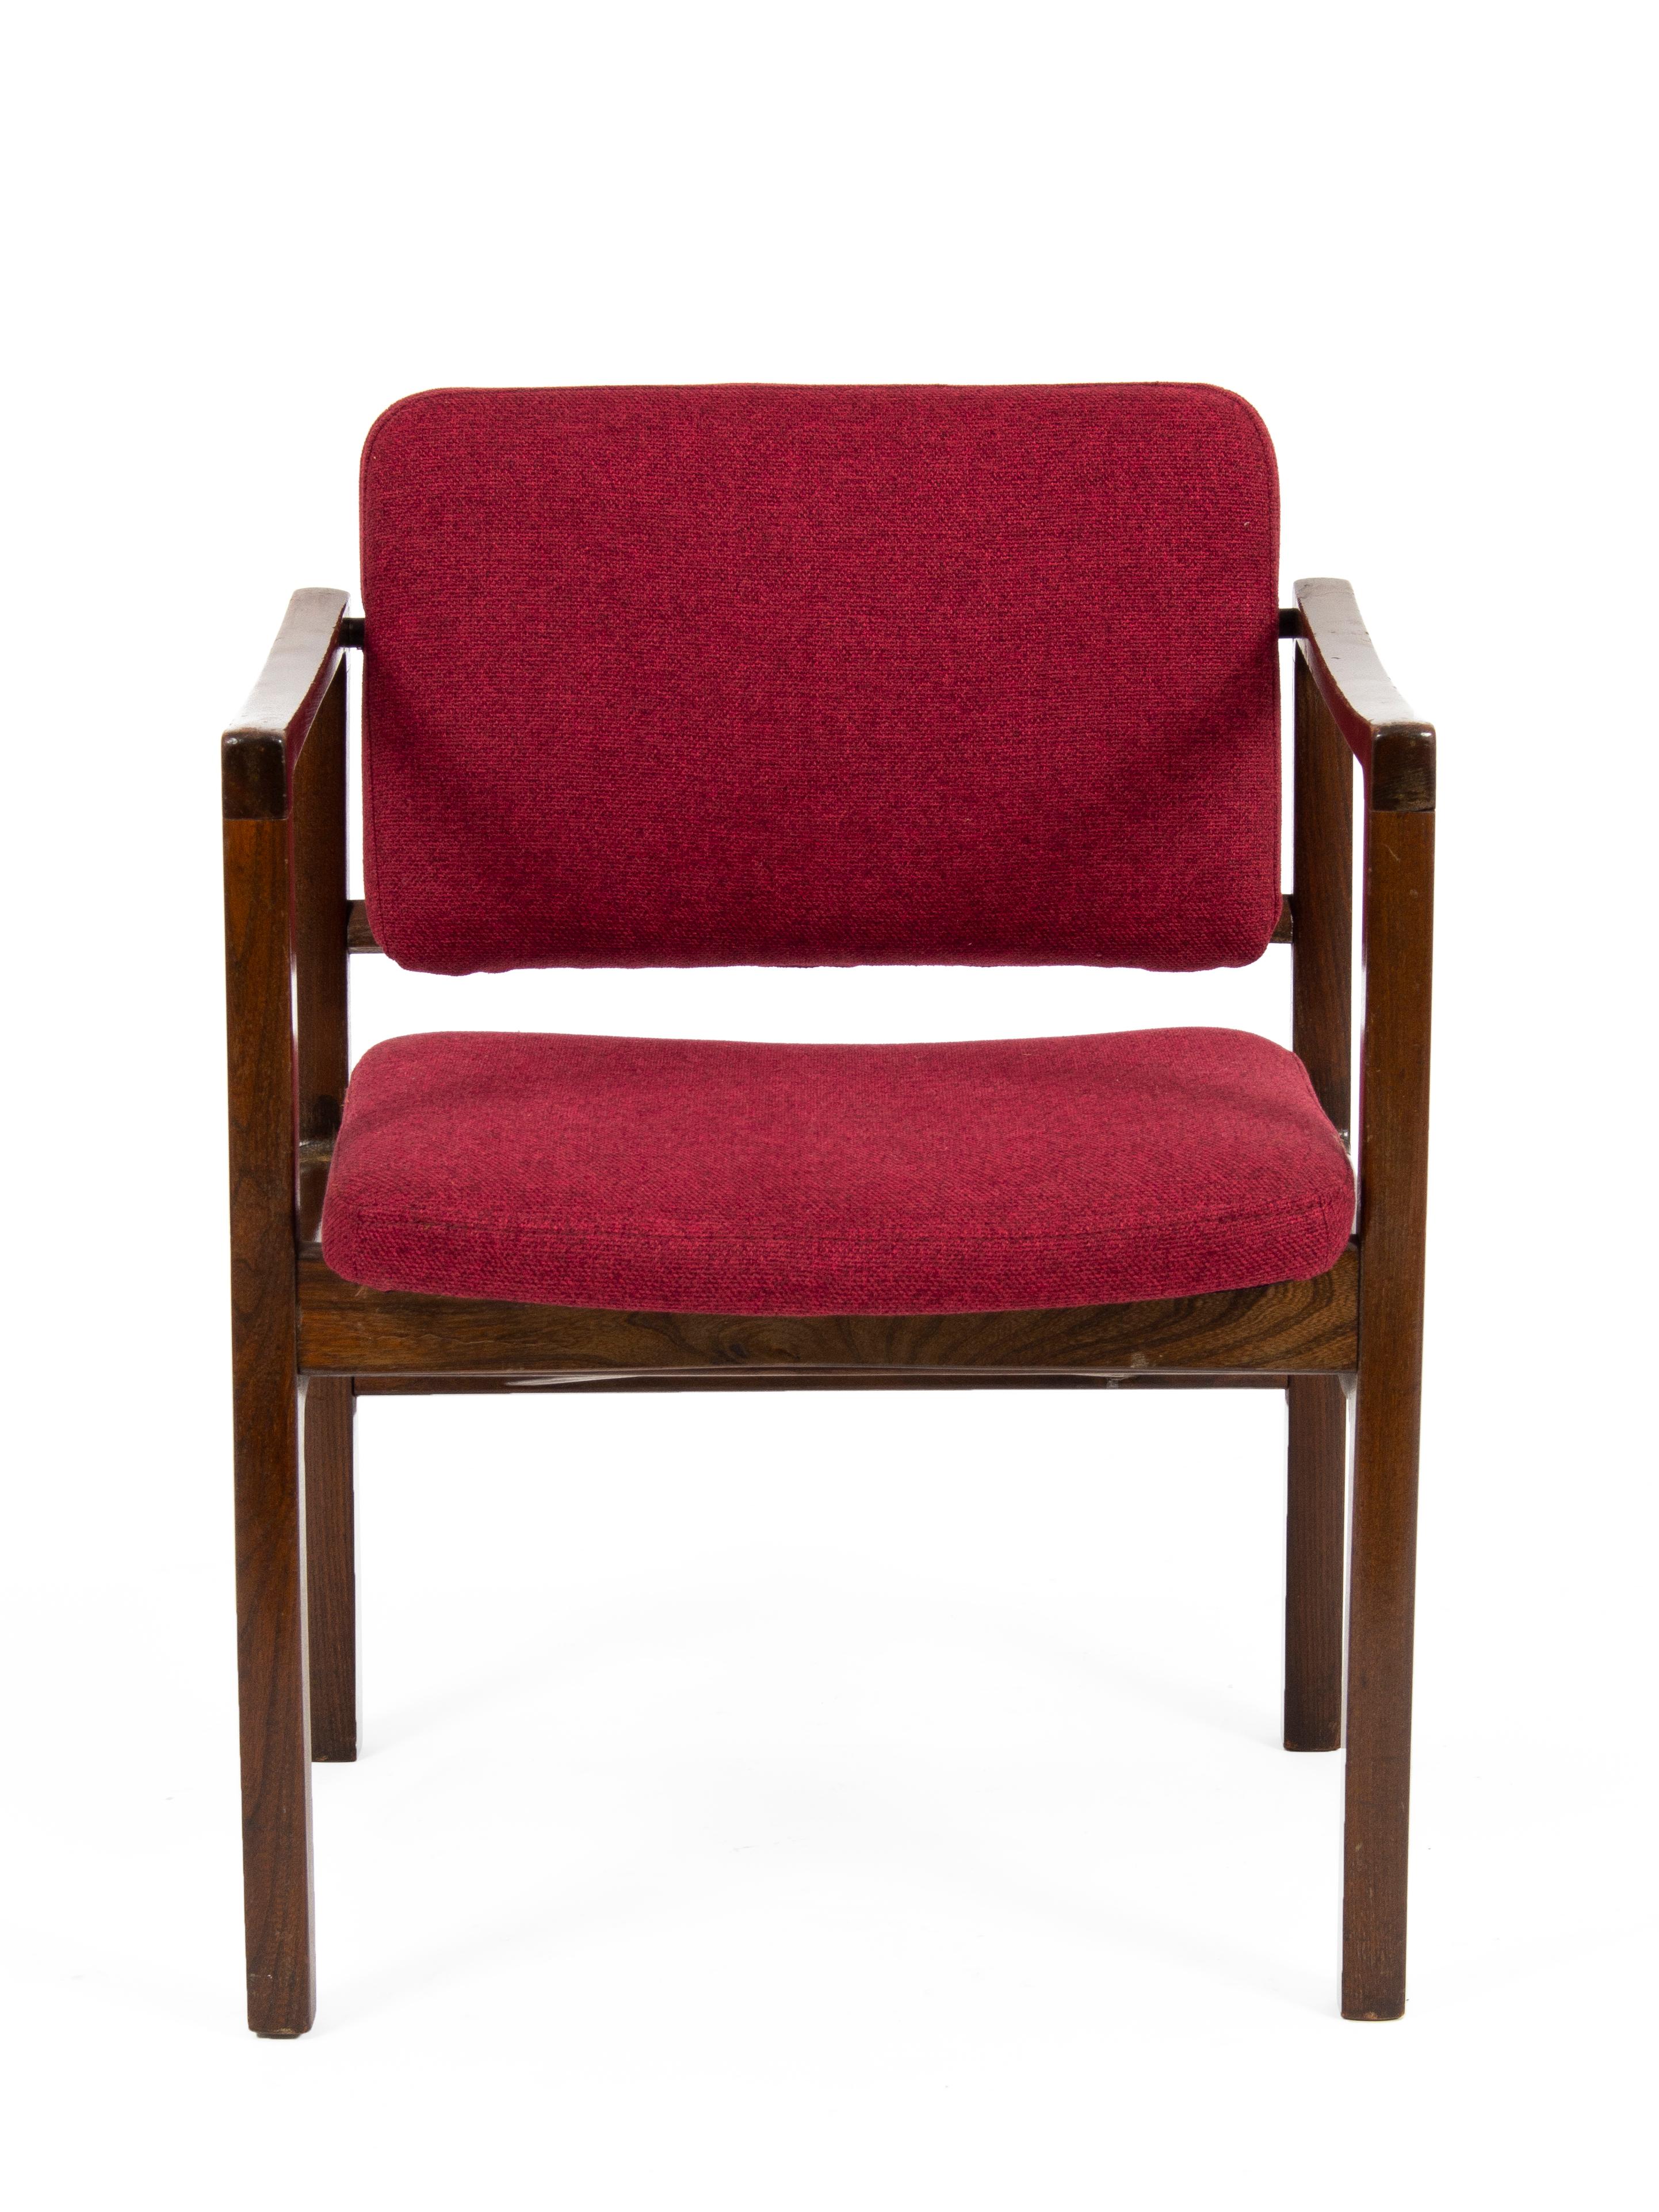 Late 20th Century Red Czechoslovakian Mid-Century Modern Armchair Set '8 Pieces' For Sale